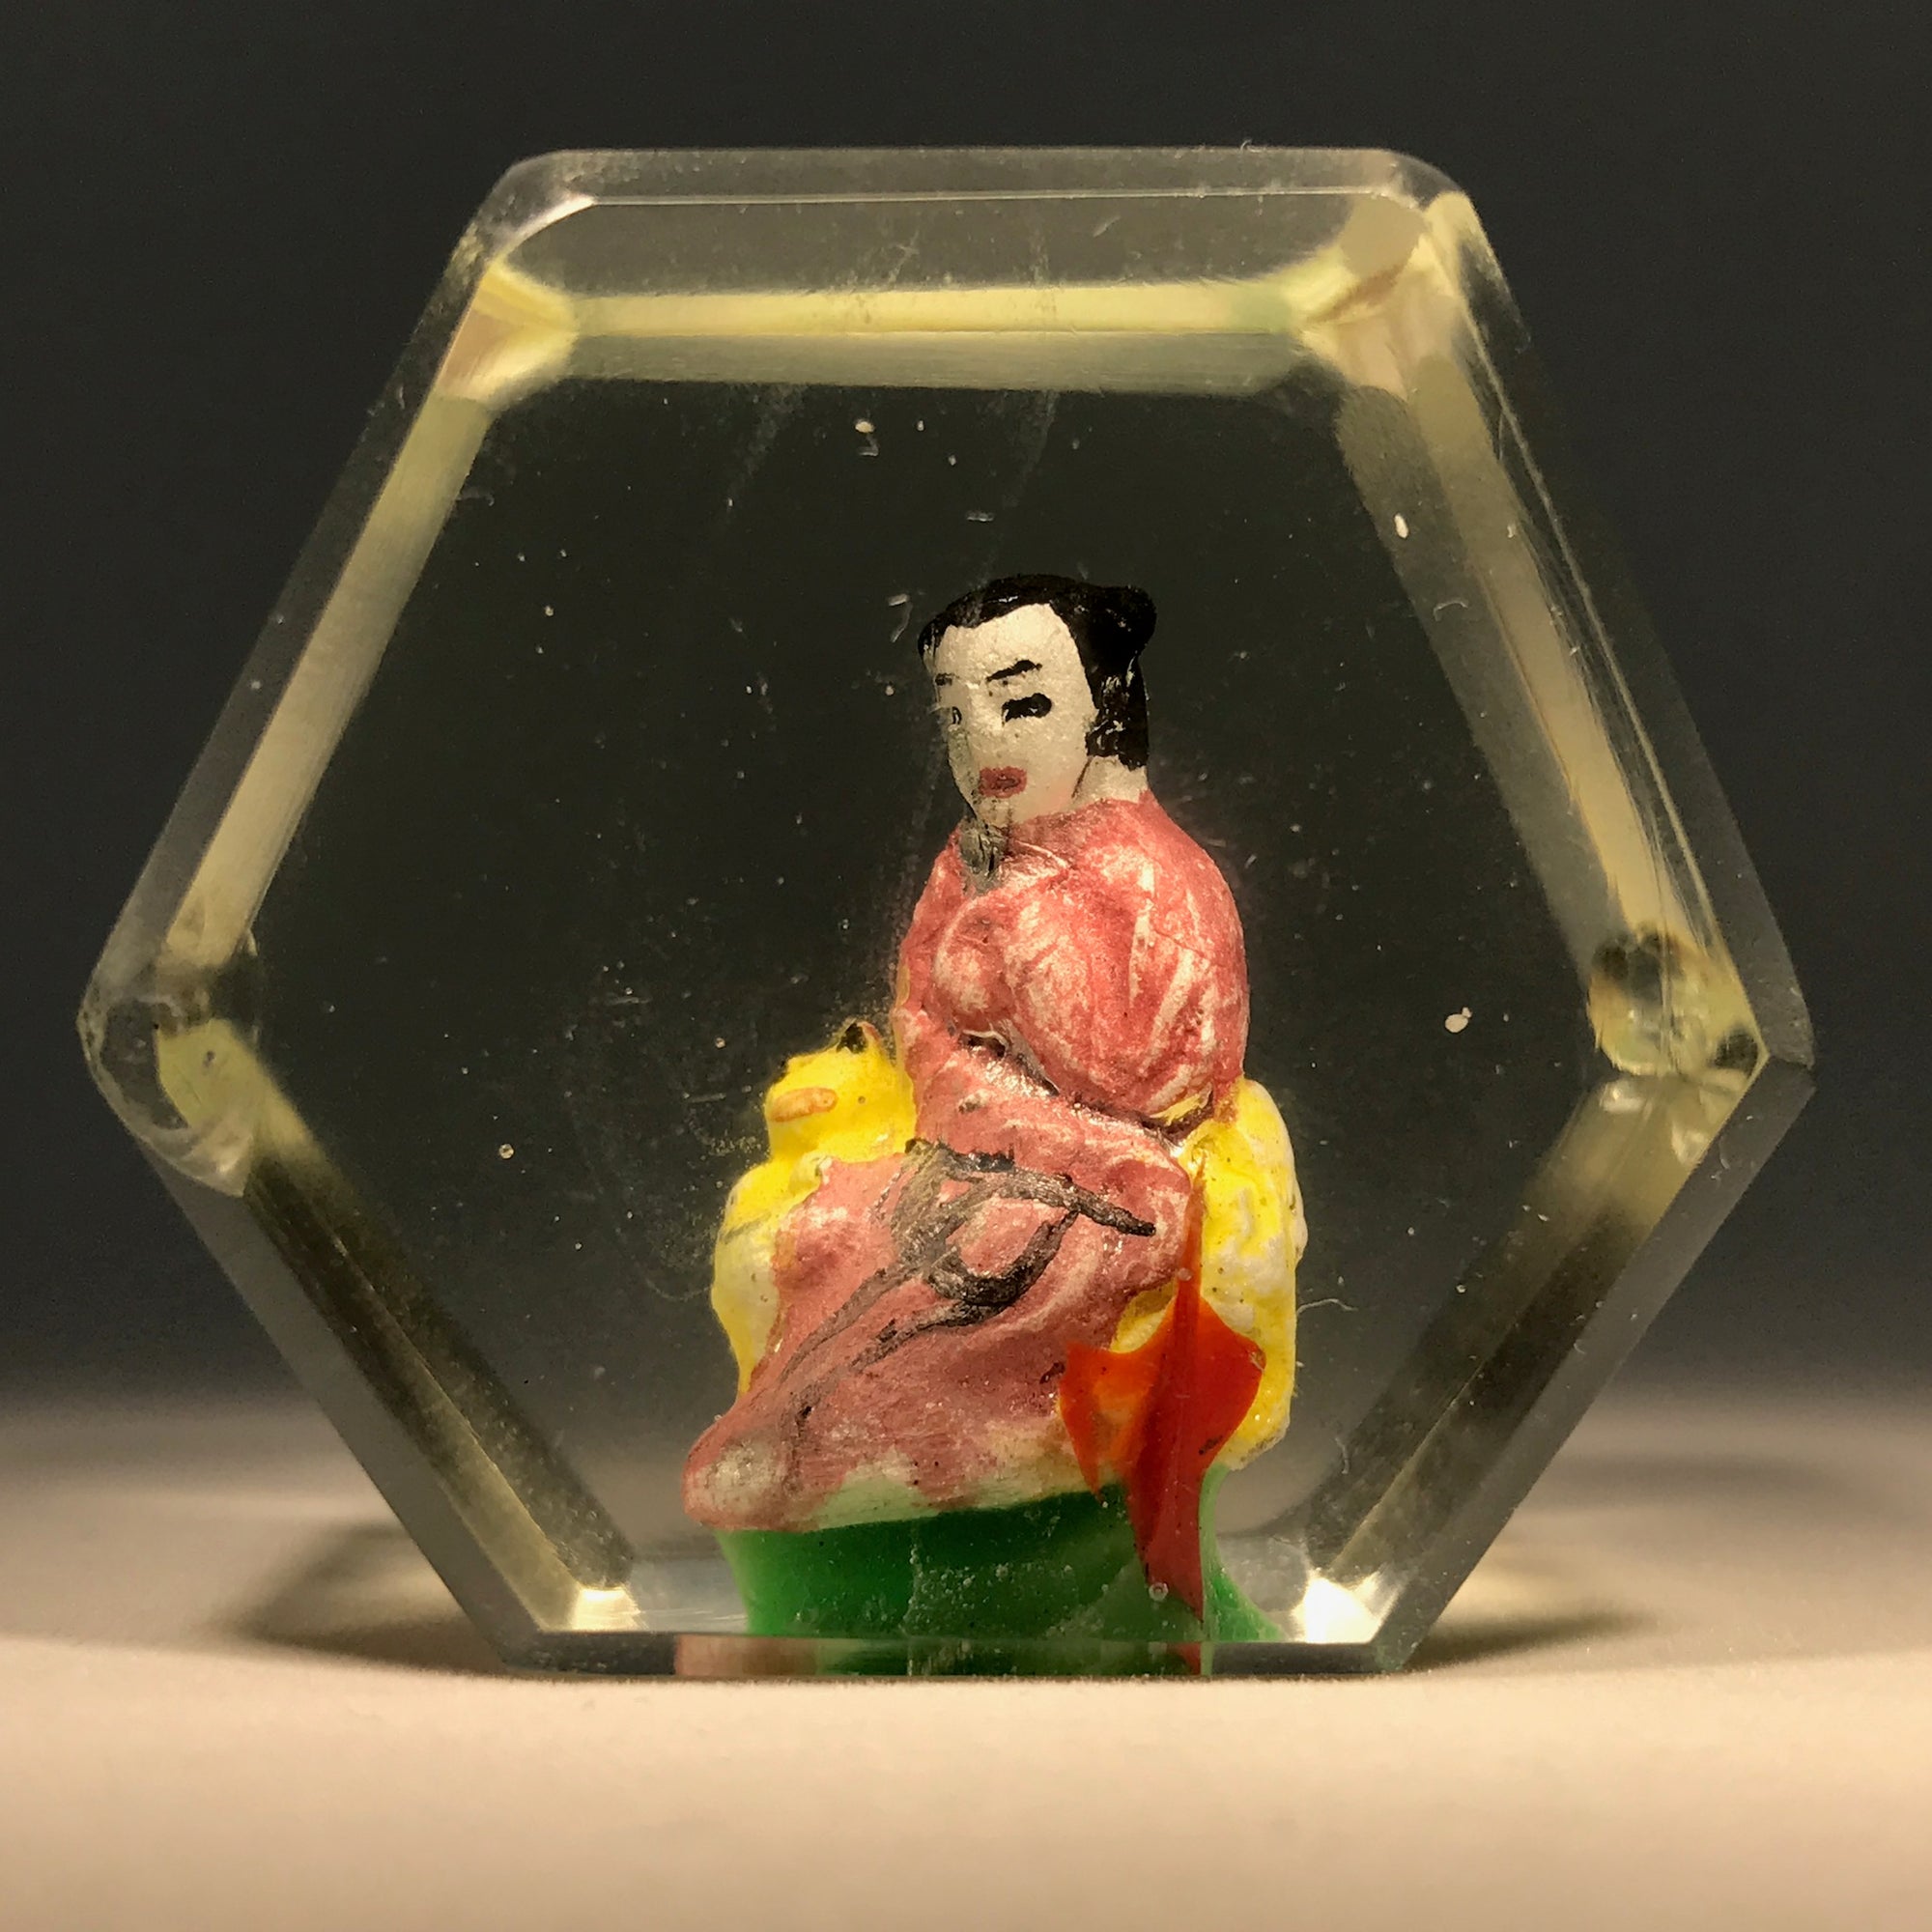 Rare Early Chinese Art Glass Paperweight Hand-Painted Sulphide Seated Monk